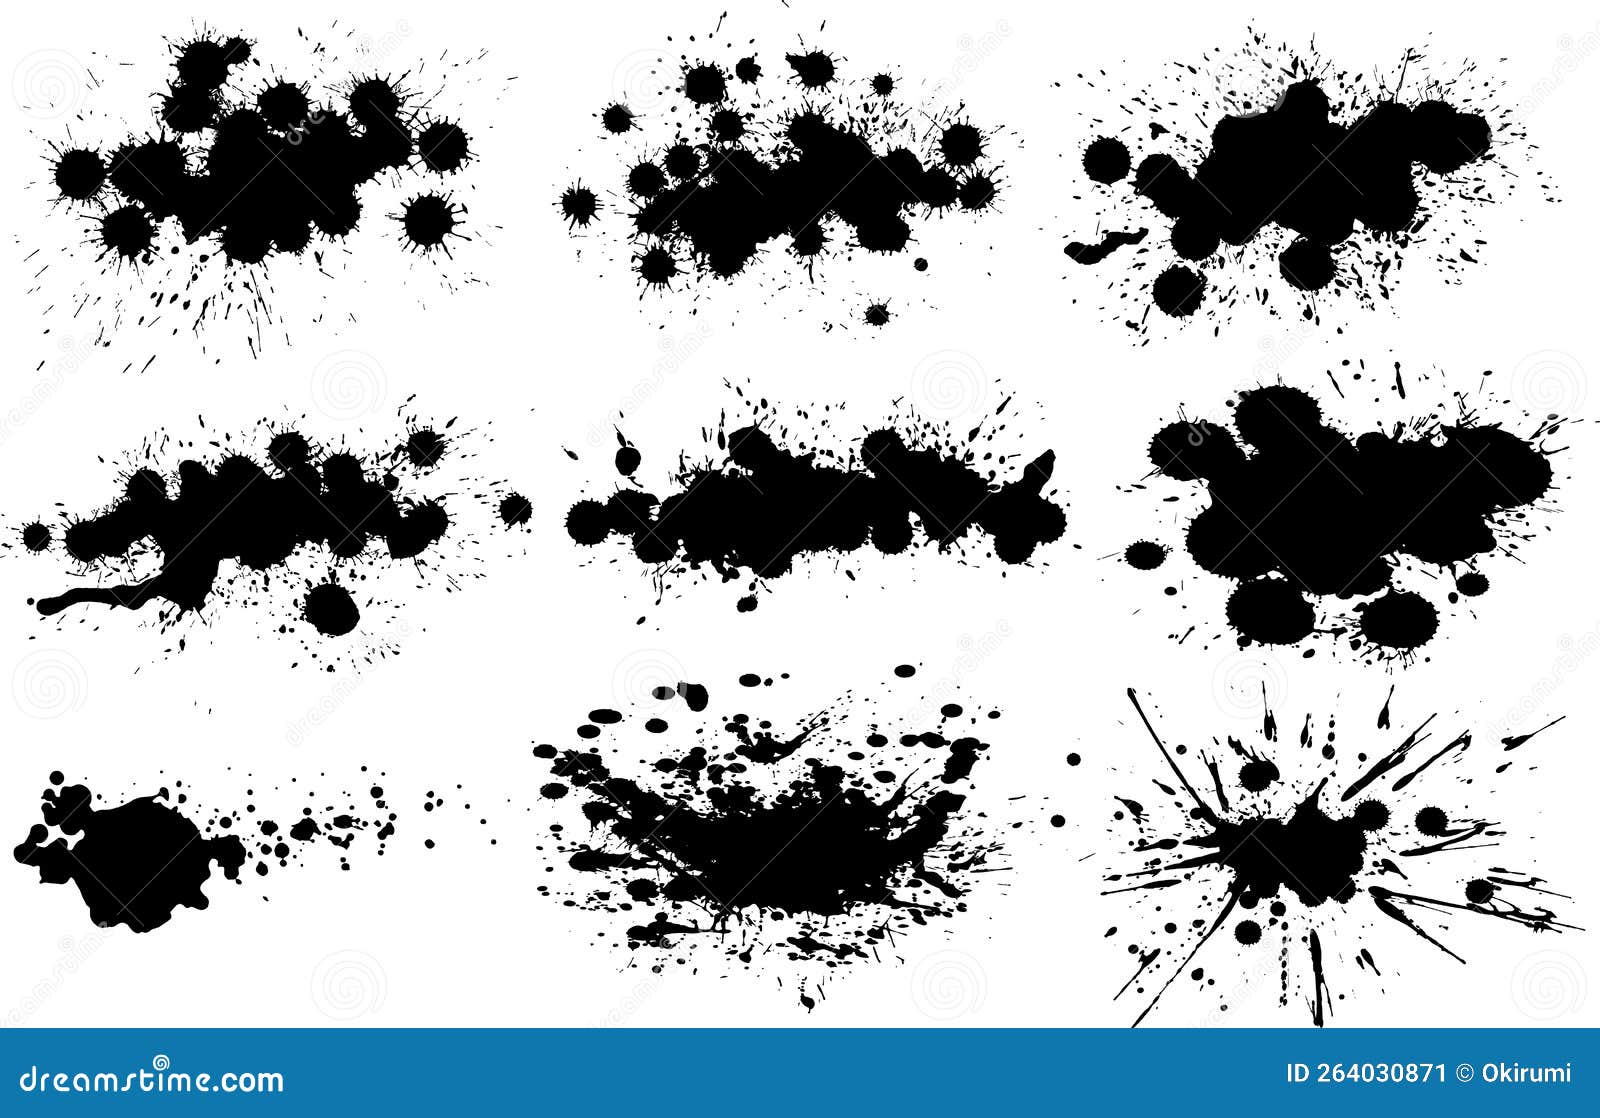 Ink Blobs and Splashes Grunge Vector Image Stock Vector - Illustration ...